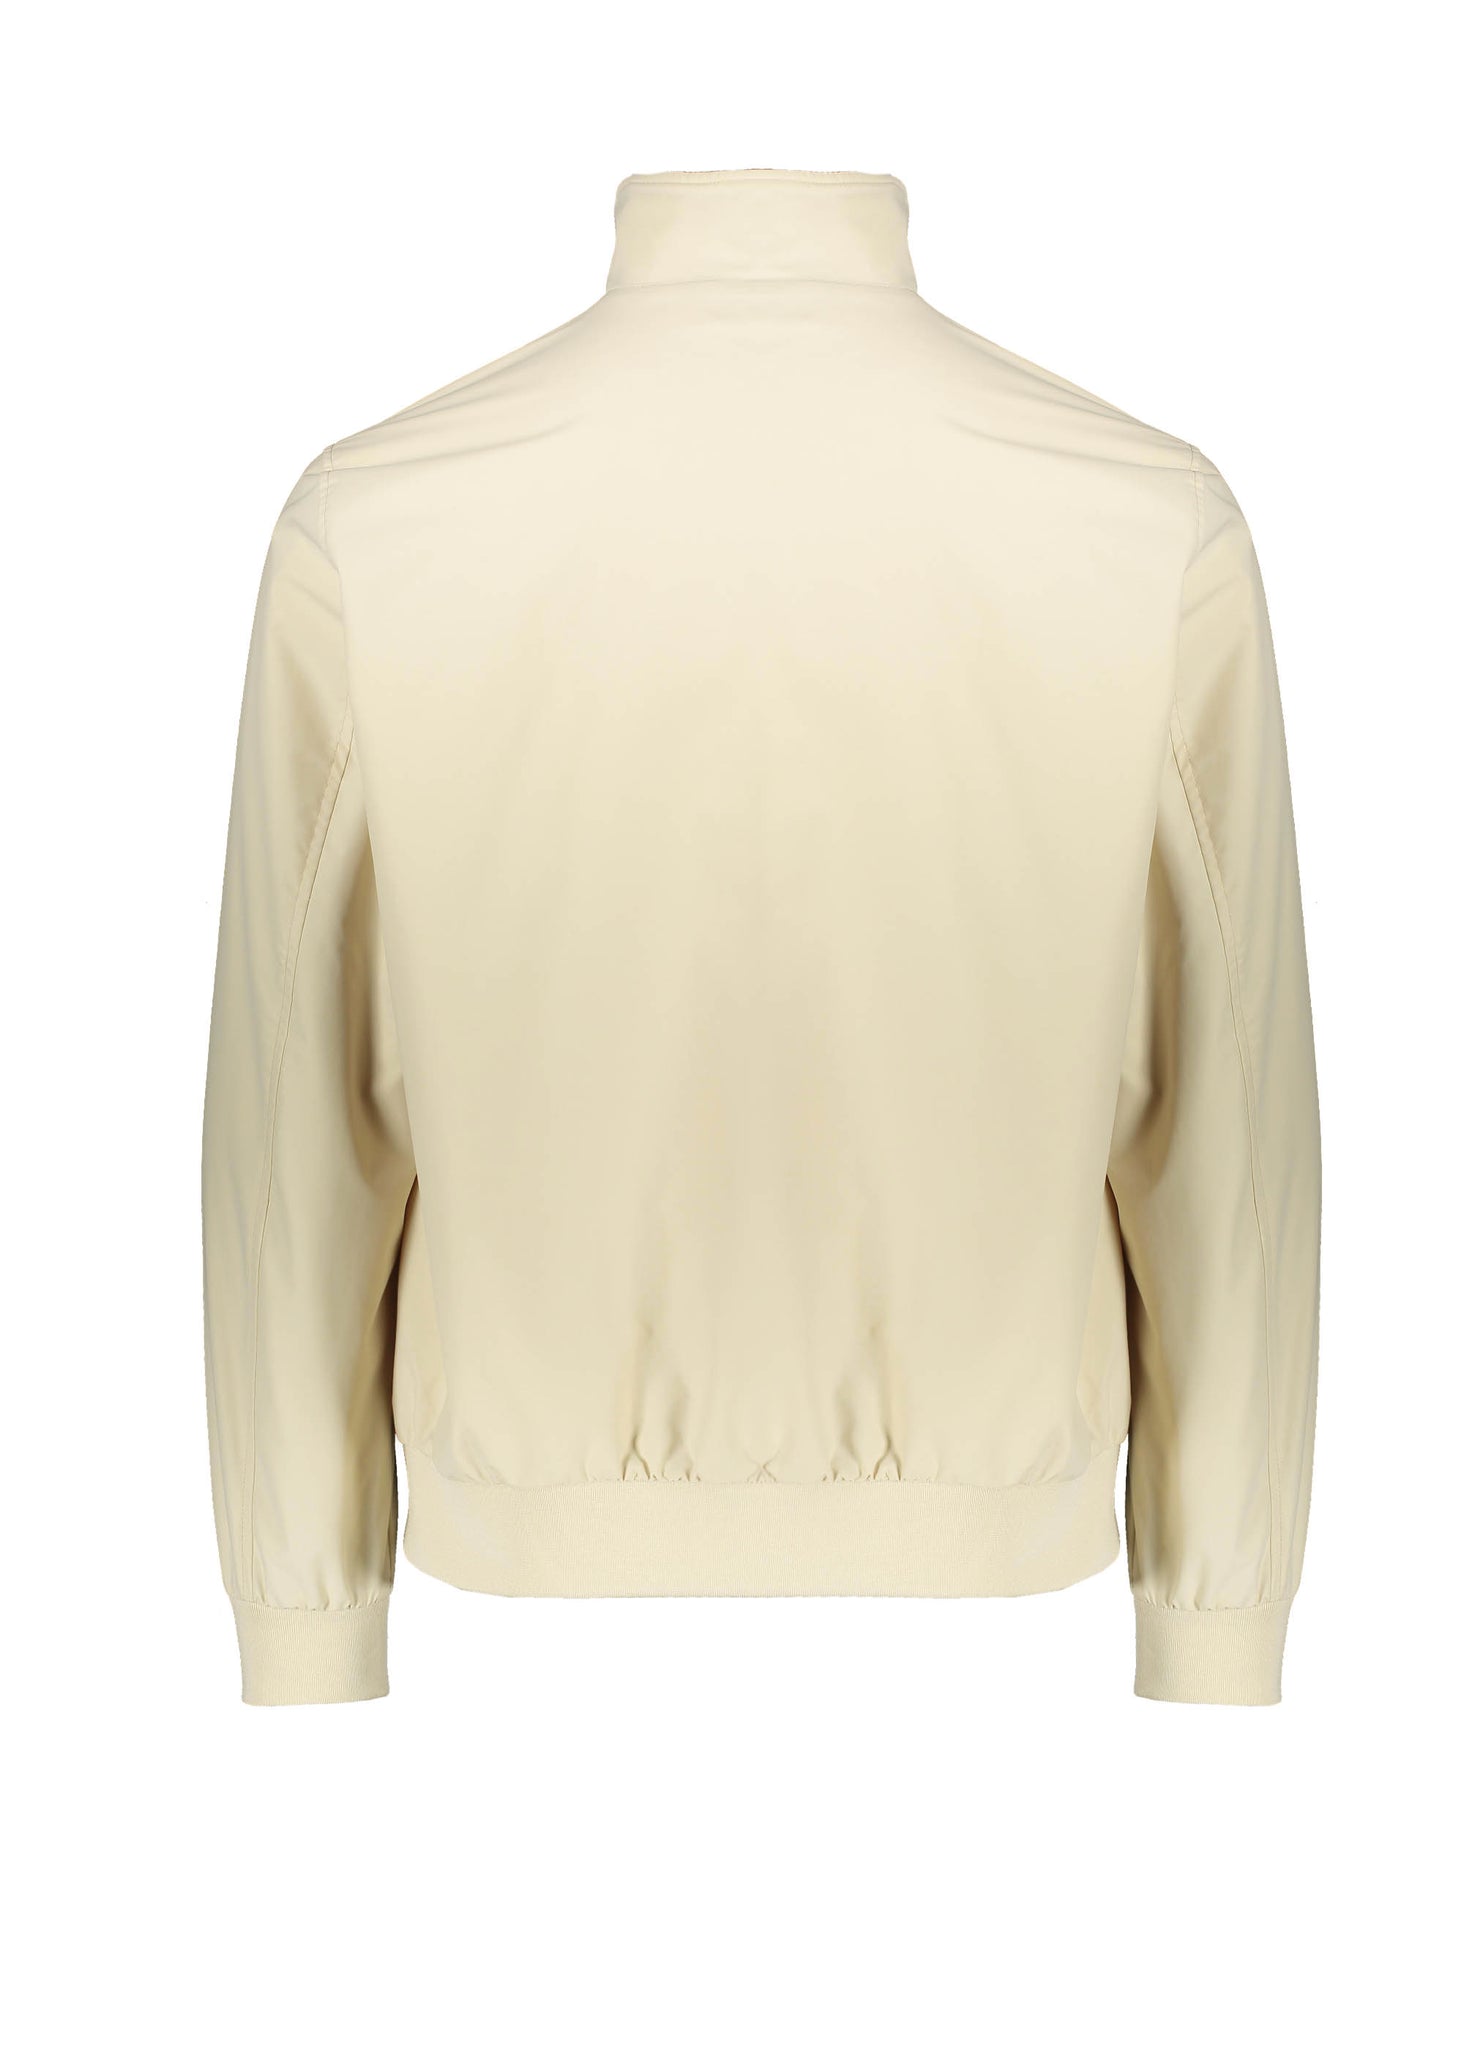 Fred Perry Brentham Jacket - Oatmeal